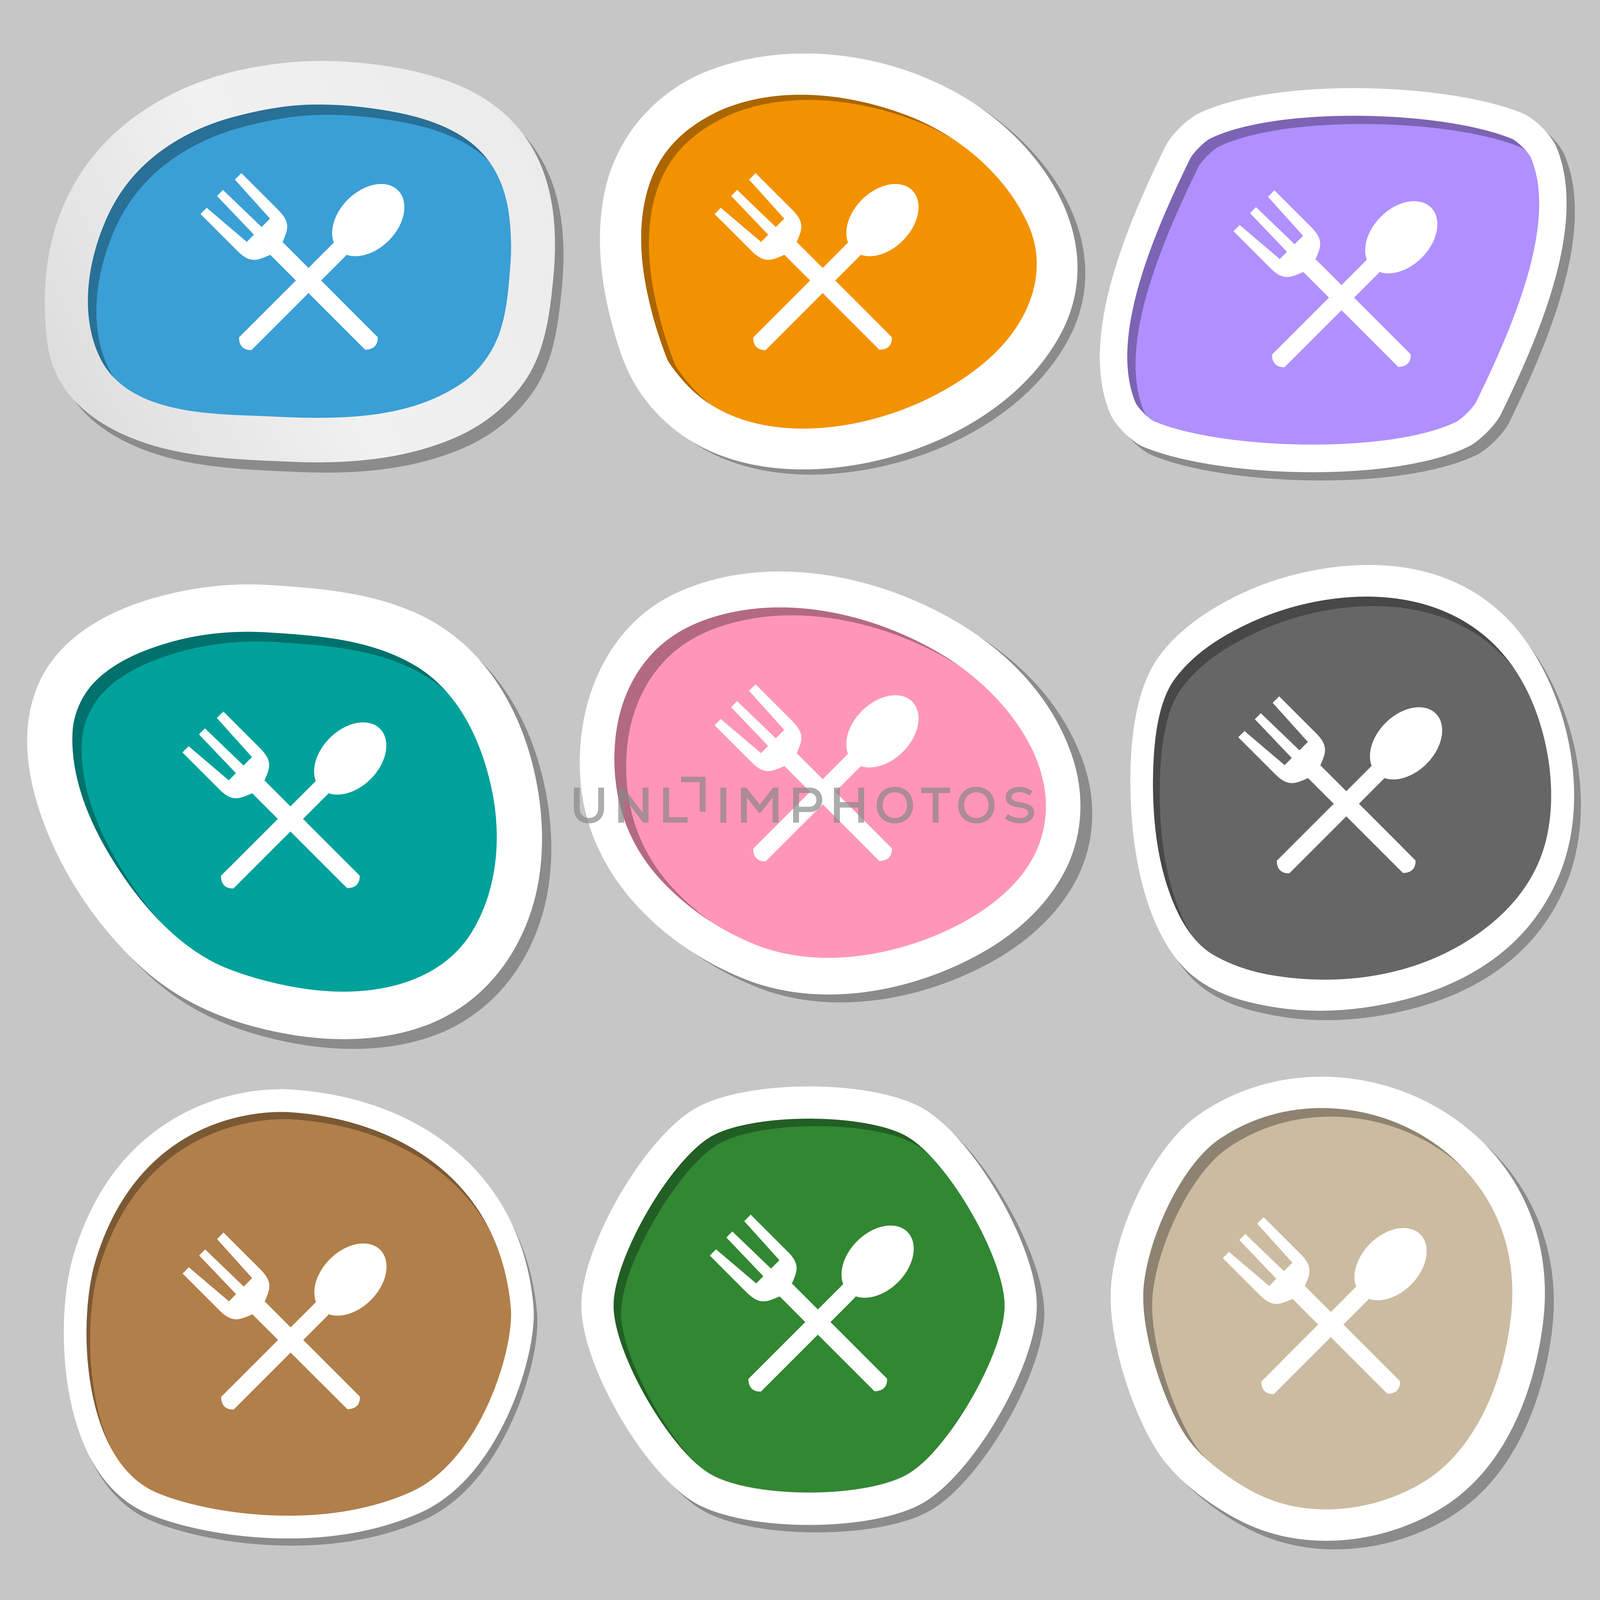 Fork and spoon crosswise, Cutlery, Eat icon sign. Multicolored paper stickers.  by serhii_lohvyniuk